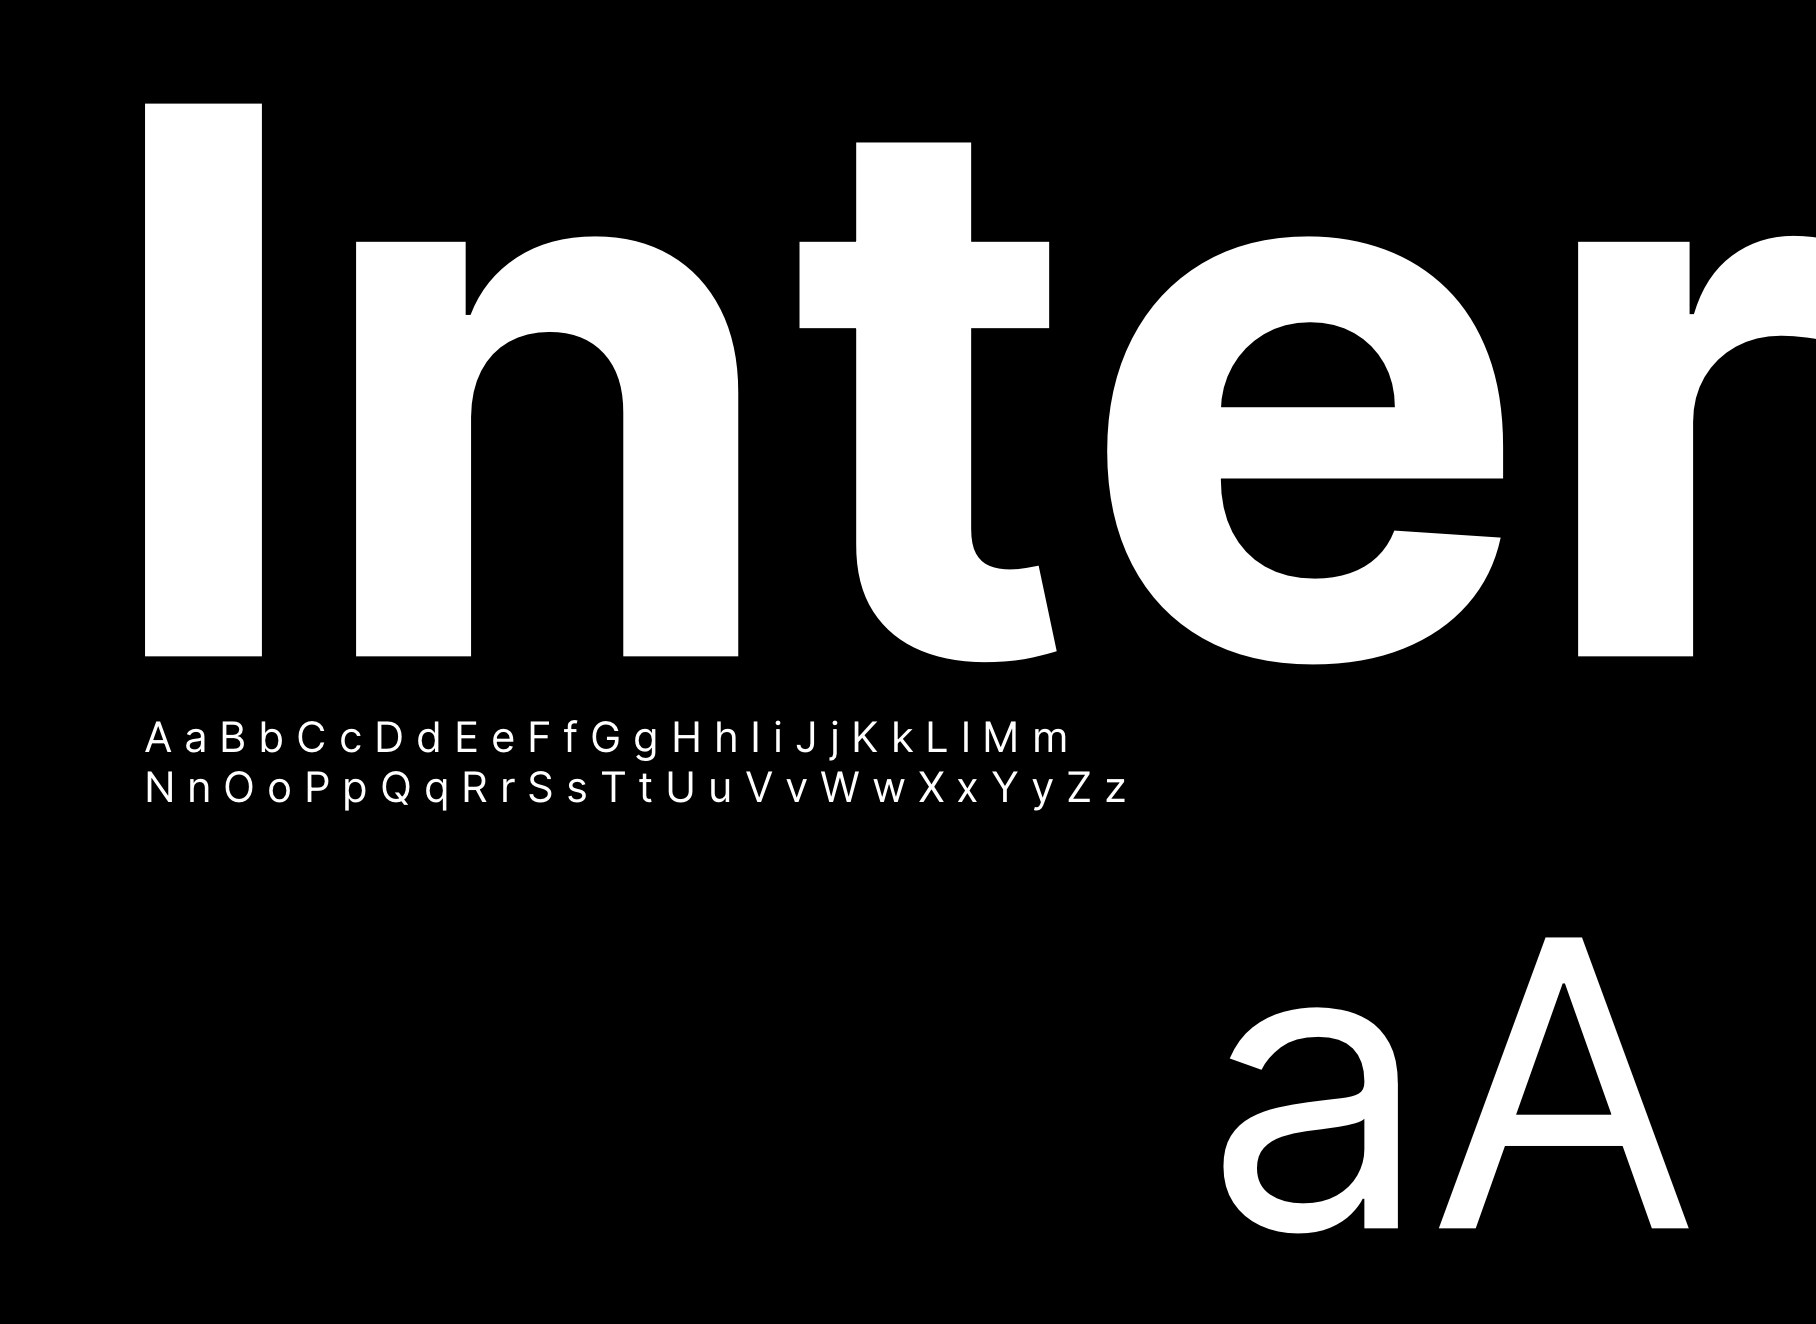 letters and numbers with Inter typeface for Agora